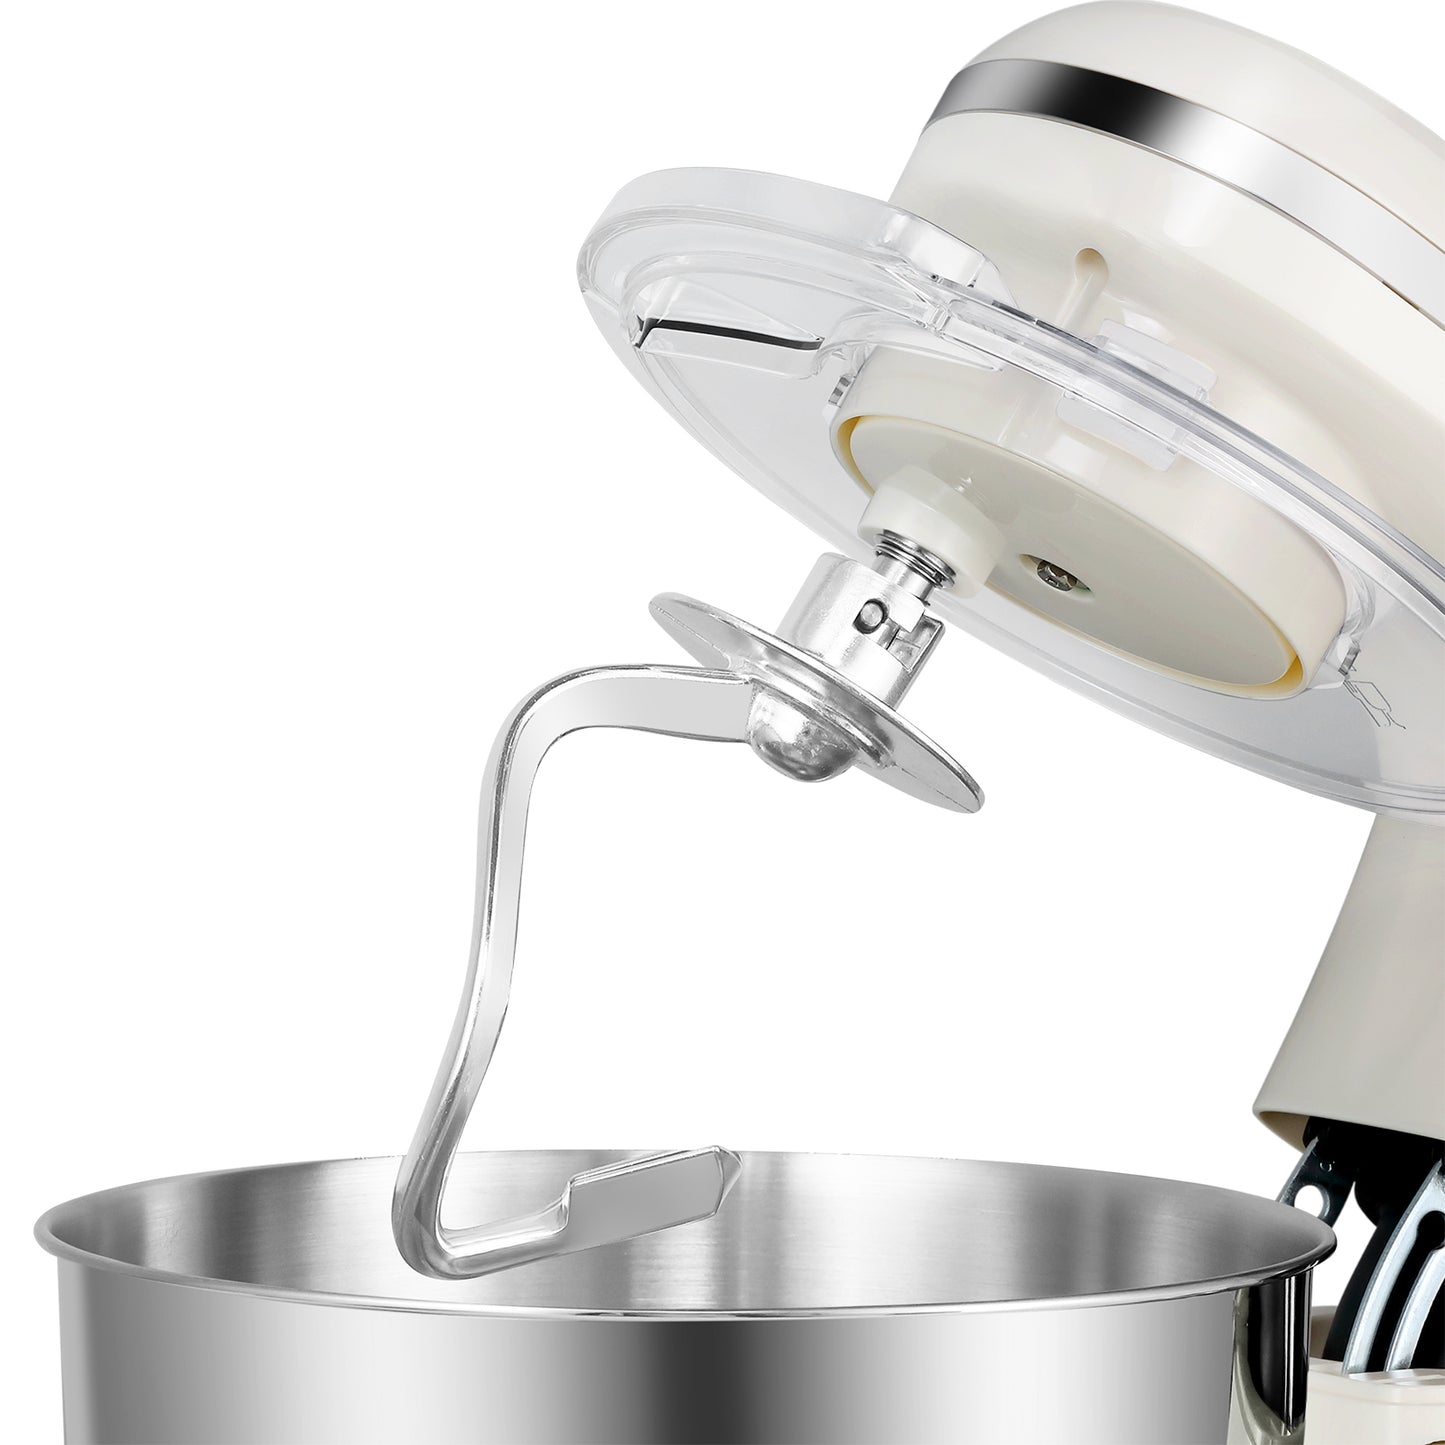 660W High Performance Stand Mixer White